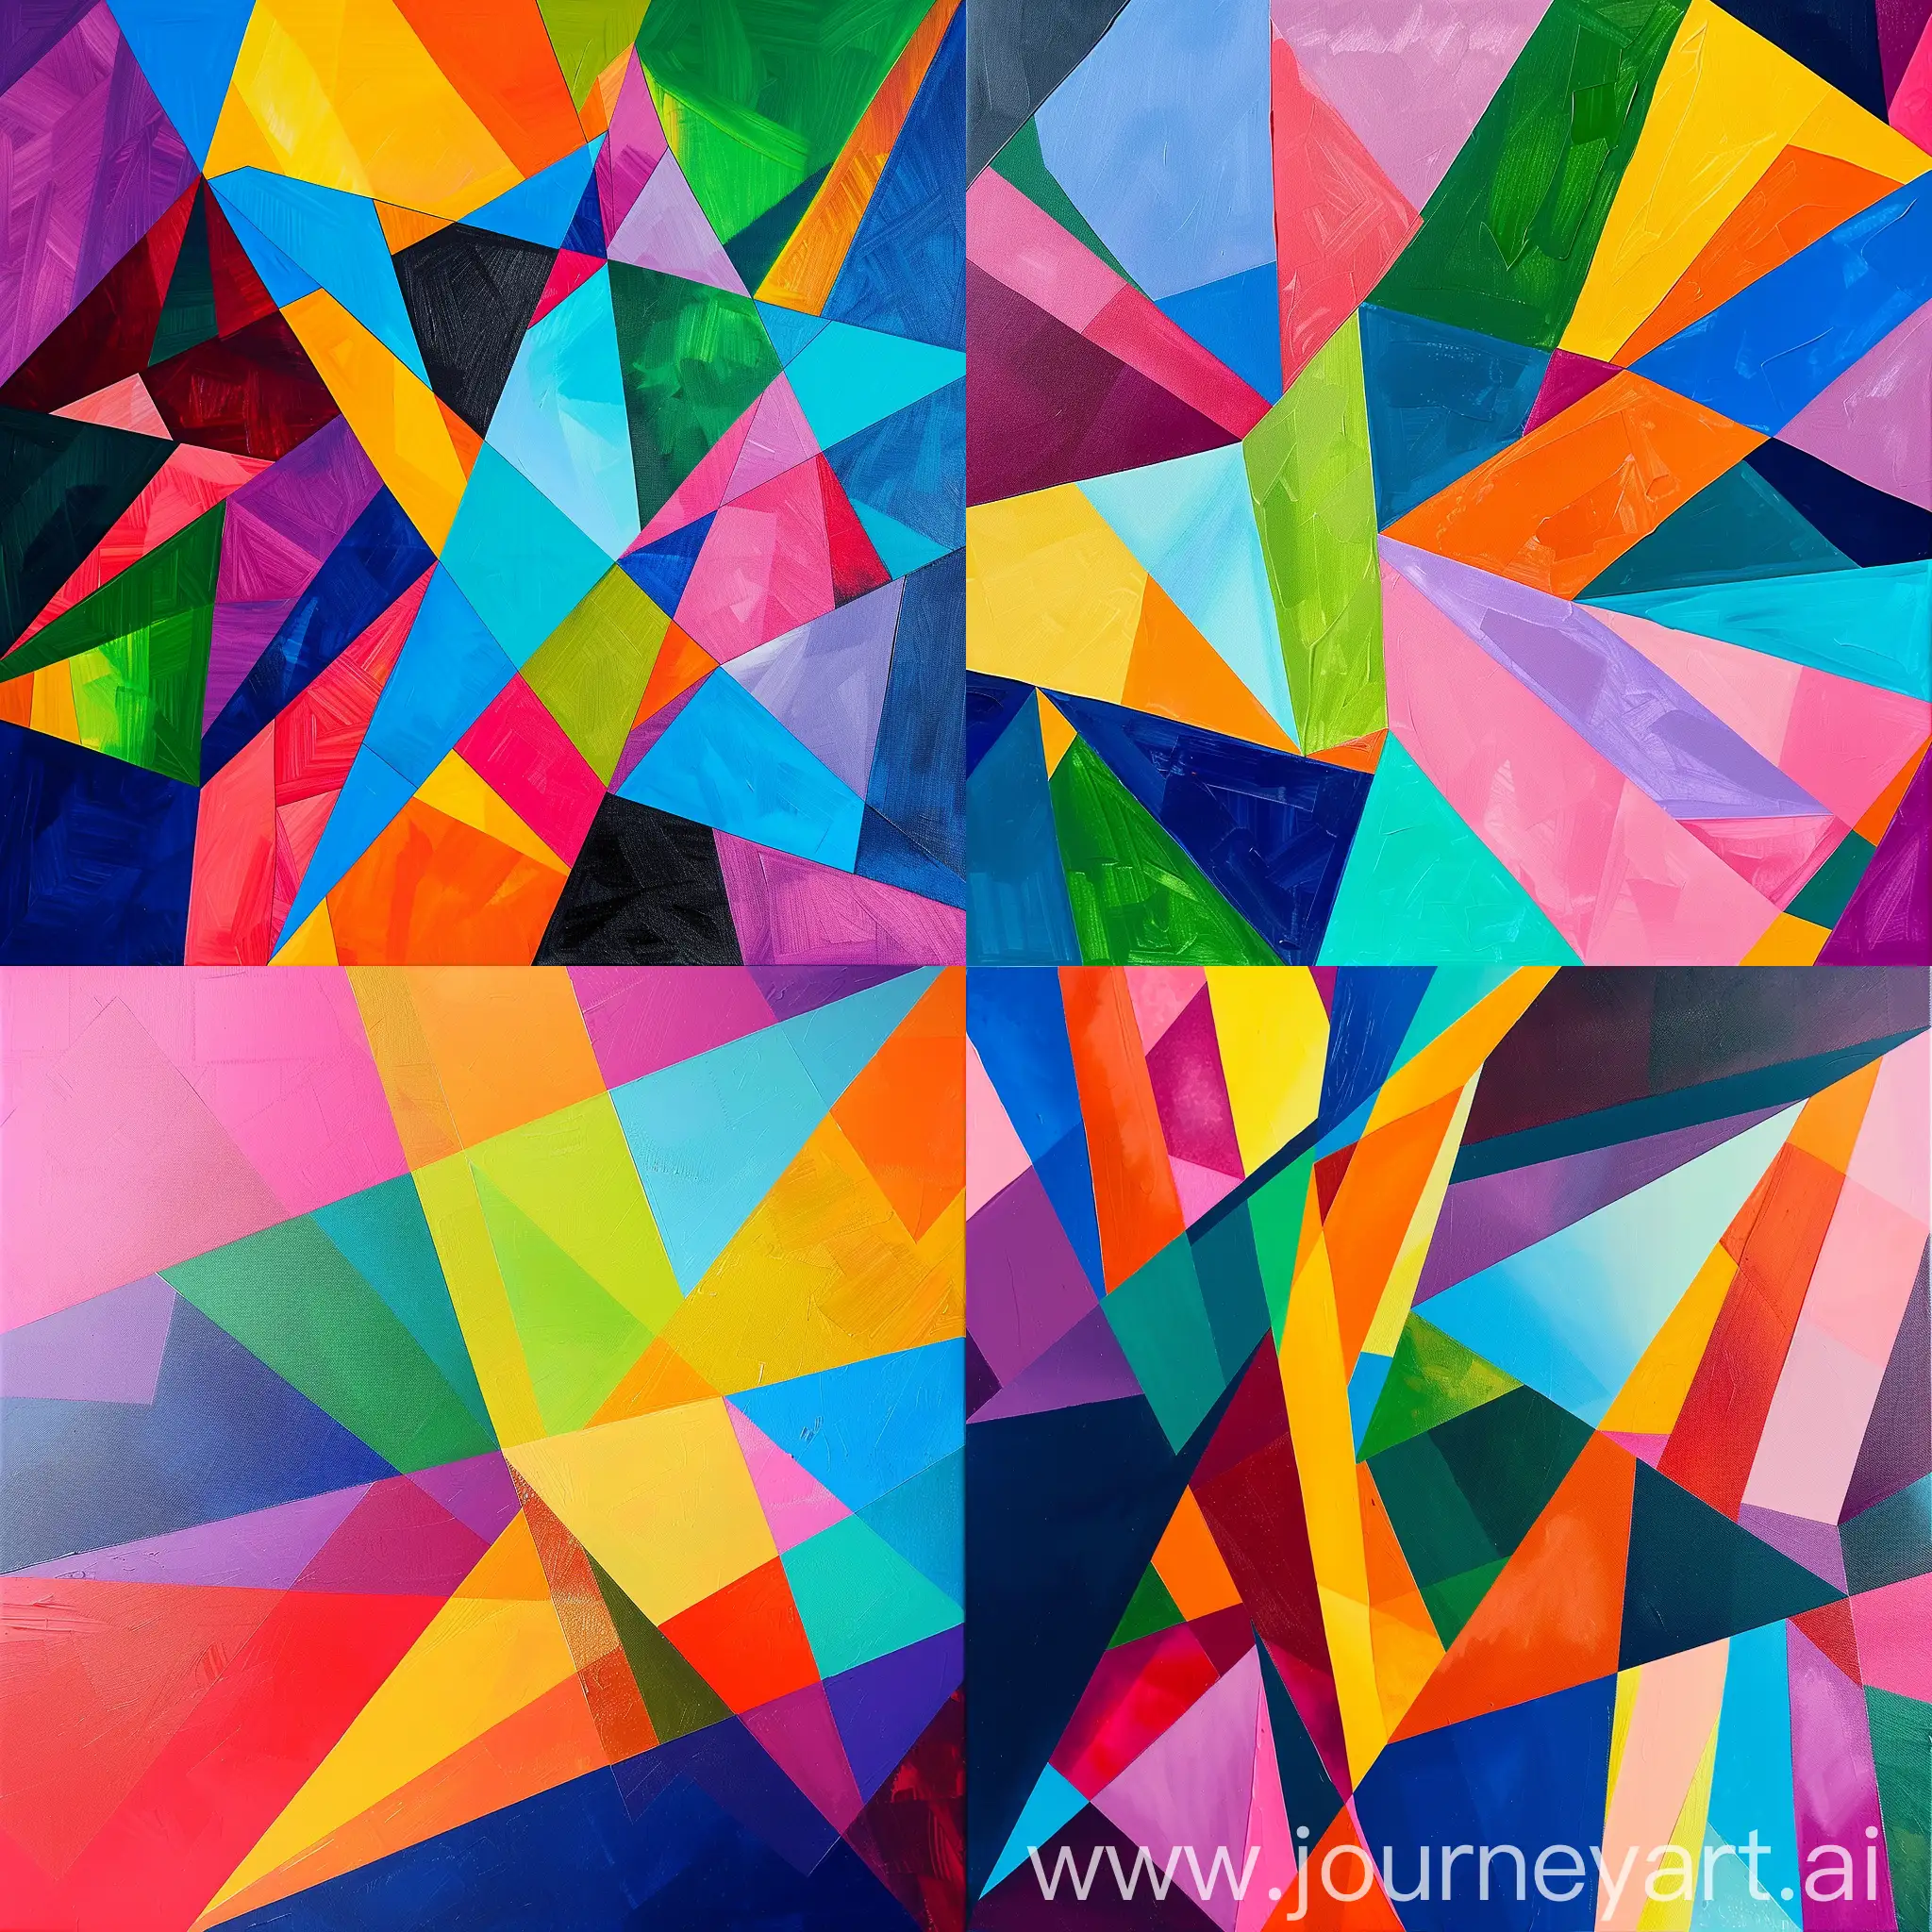 Vibrant-Geometric-Abstract-Painting-with-Bold-Colors-on-Canvas